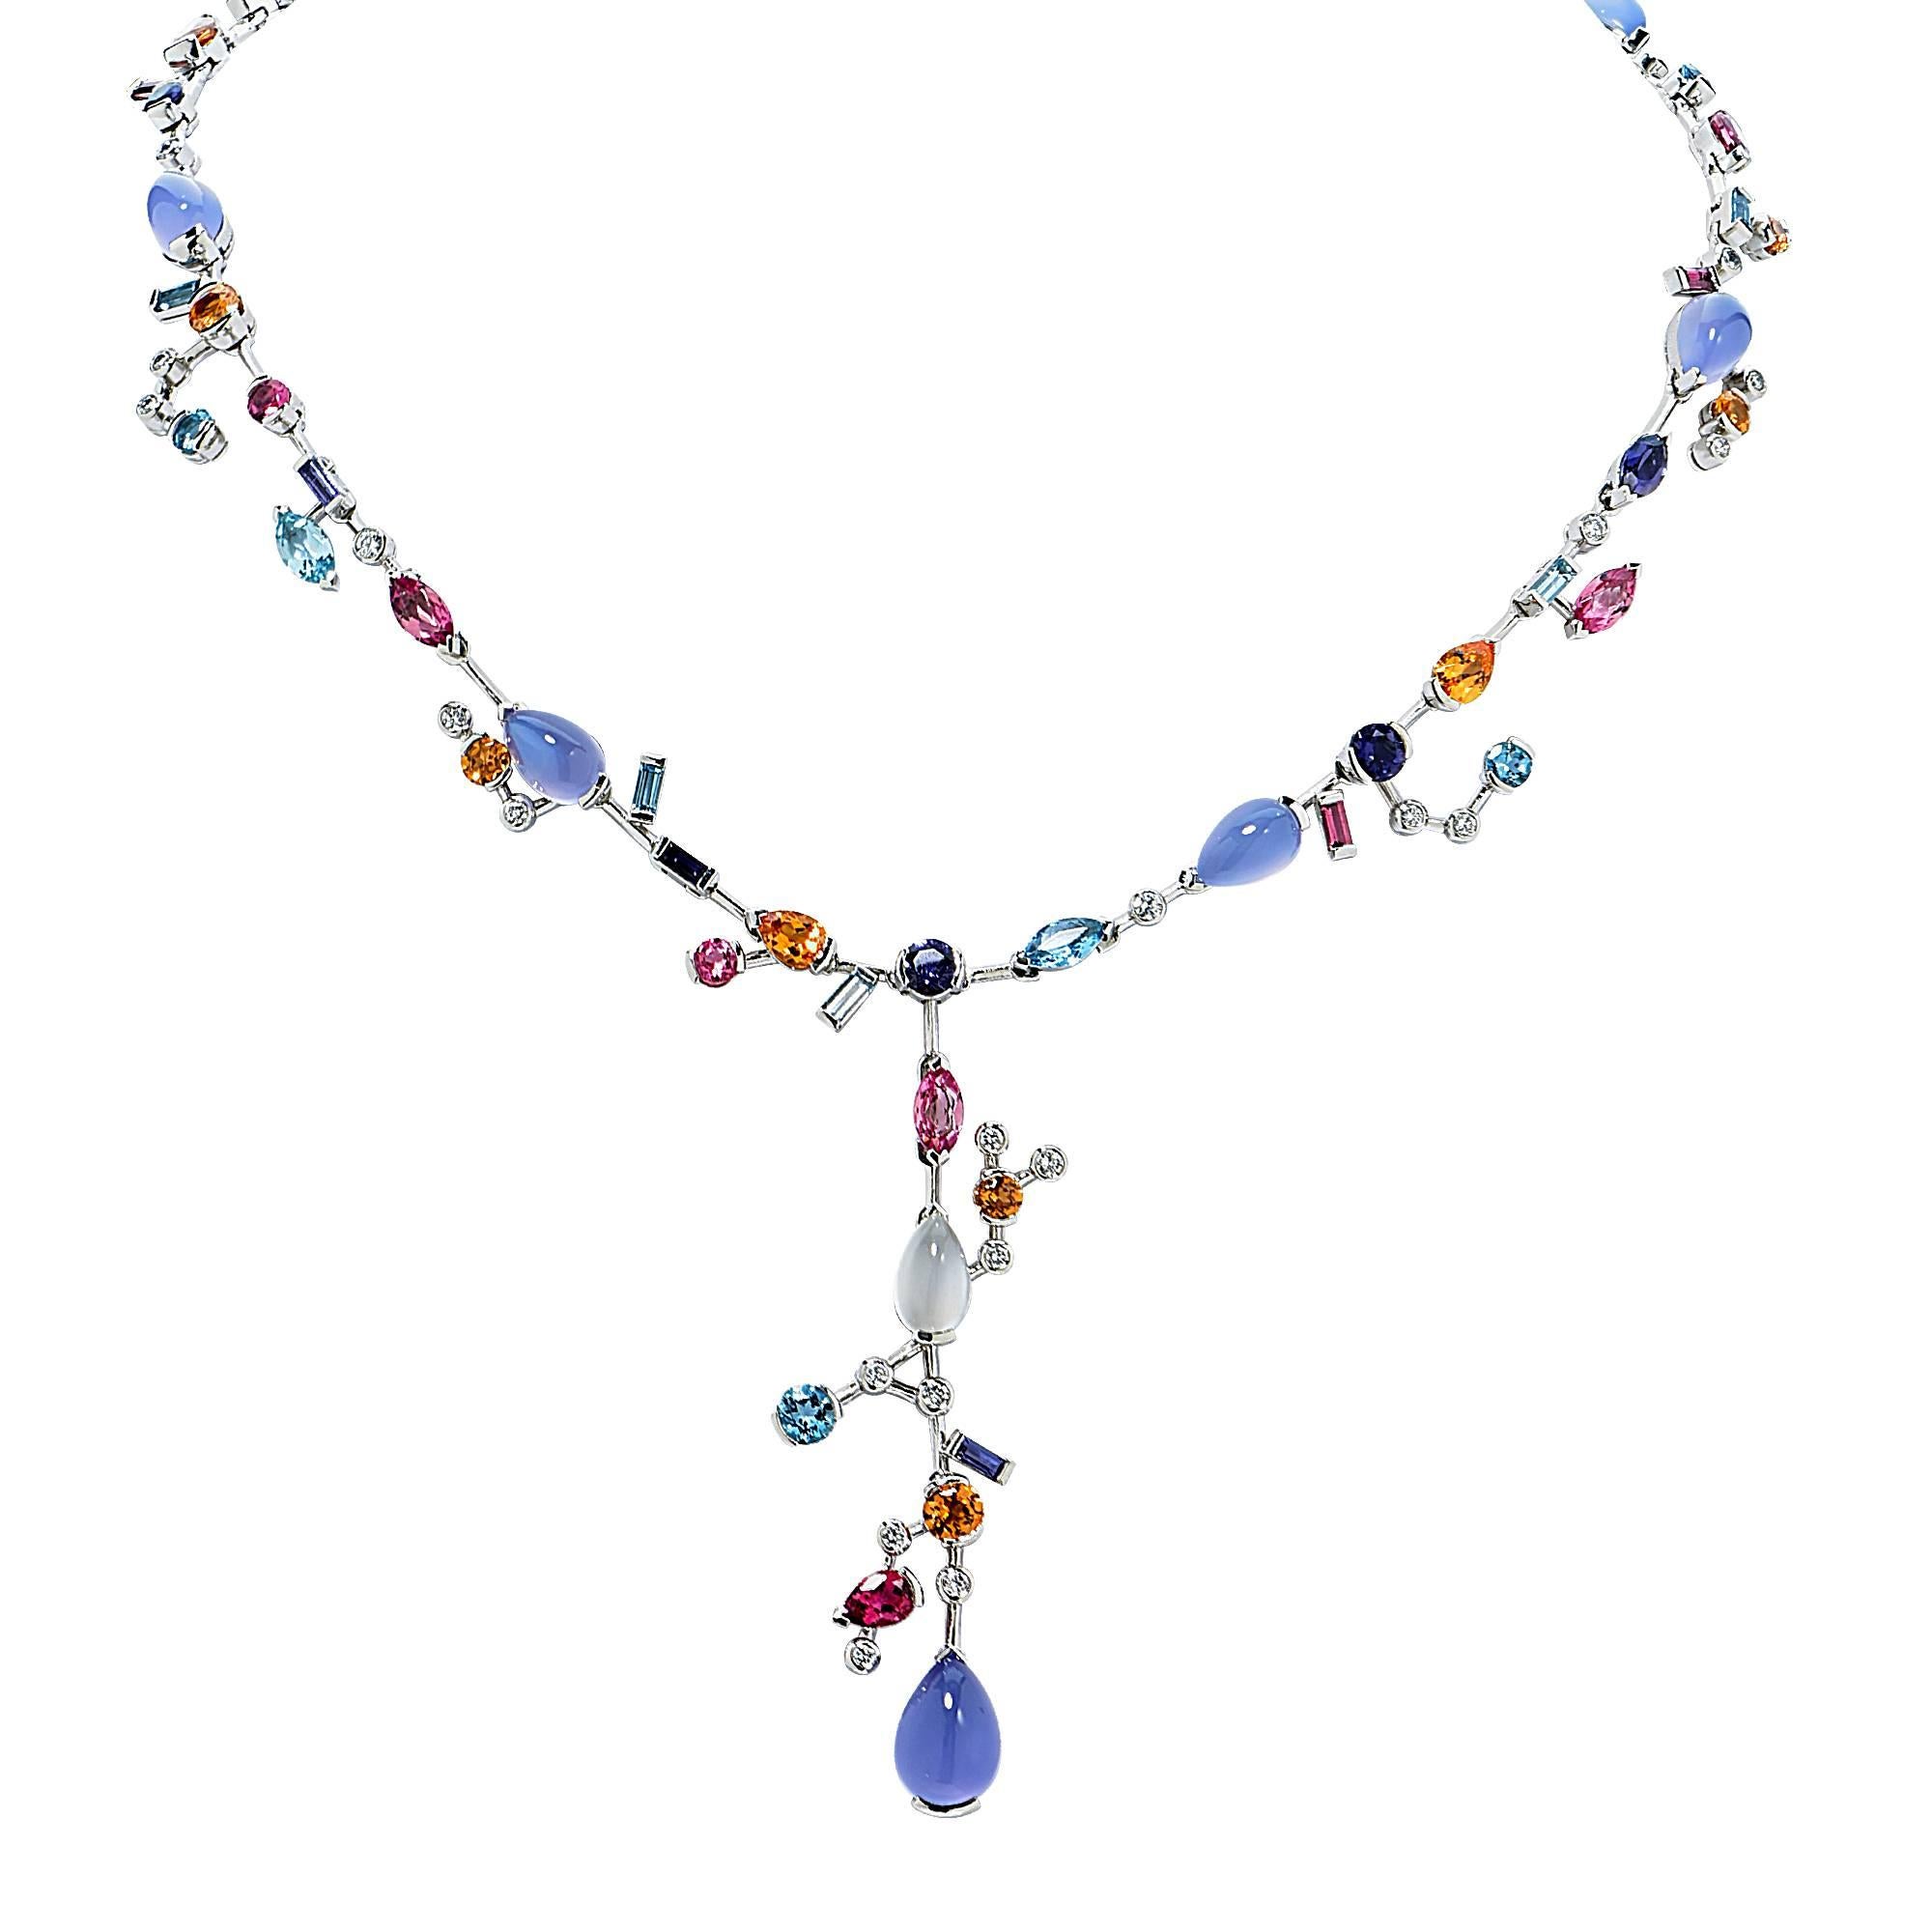 Platinum Cartier Meli Melo Necklace containing a melange of multicolored gemstones and diamonds set in a whimsical fashion and ending in a lariat. Gemstones include pink tourmaline, aquamarine, iolite, garnet, chalcedony and moonstone with round